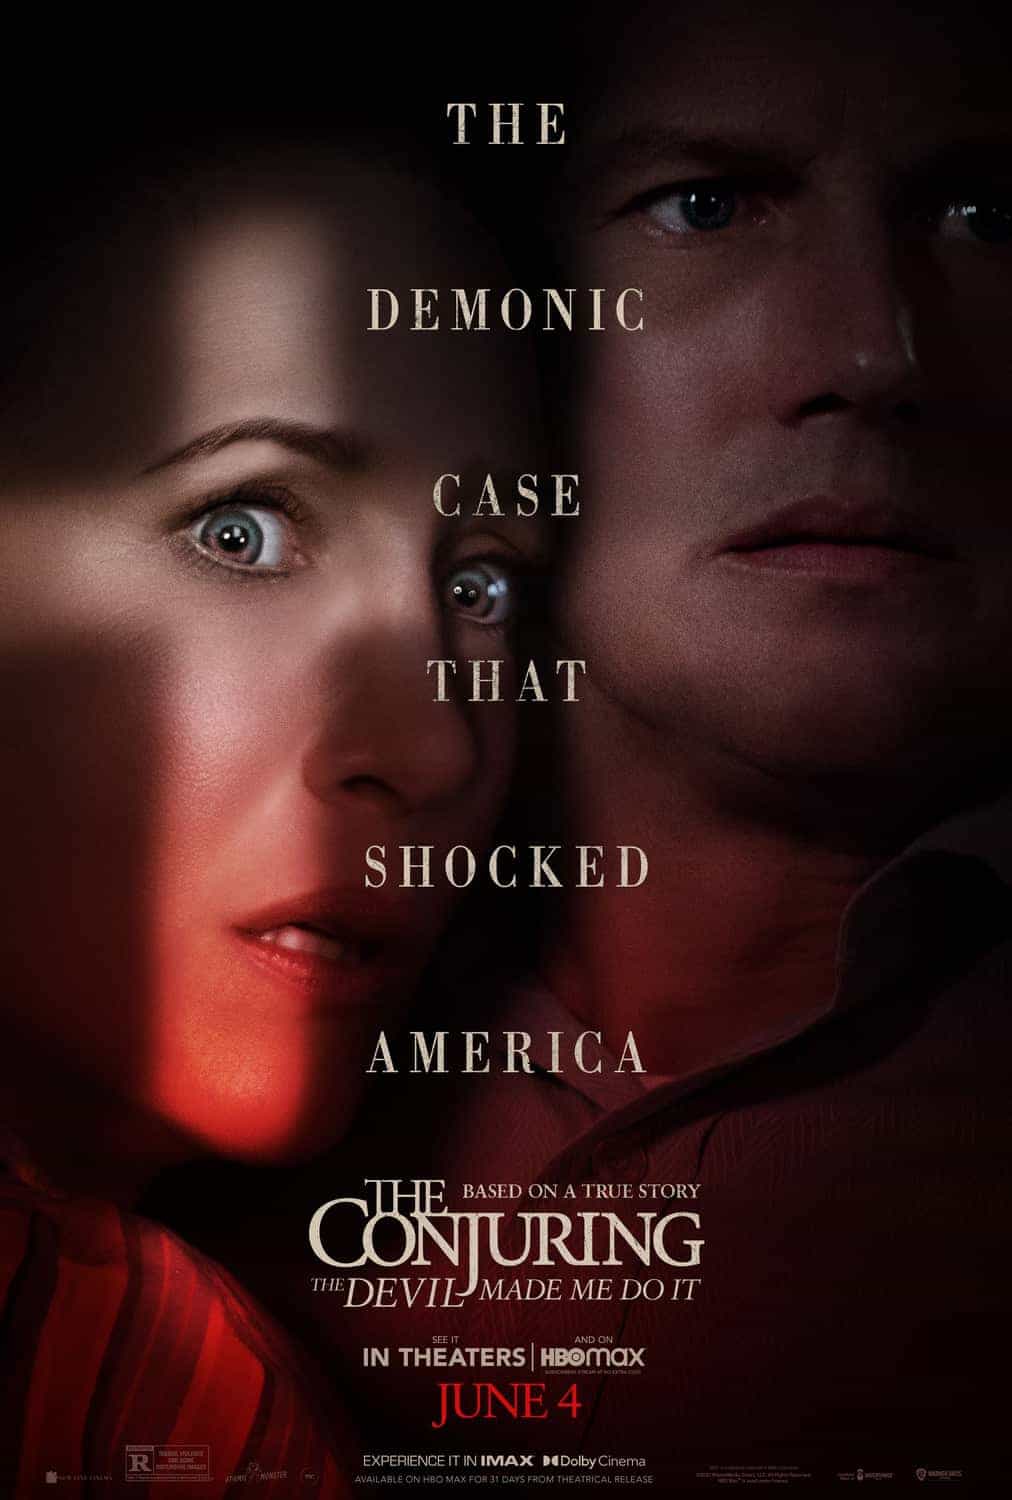 UK Box Office Weekend Report 28th - 30th May 2021: The Conjuring 3 takes over at the top of the box office on second weekend of cinema reopening